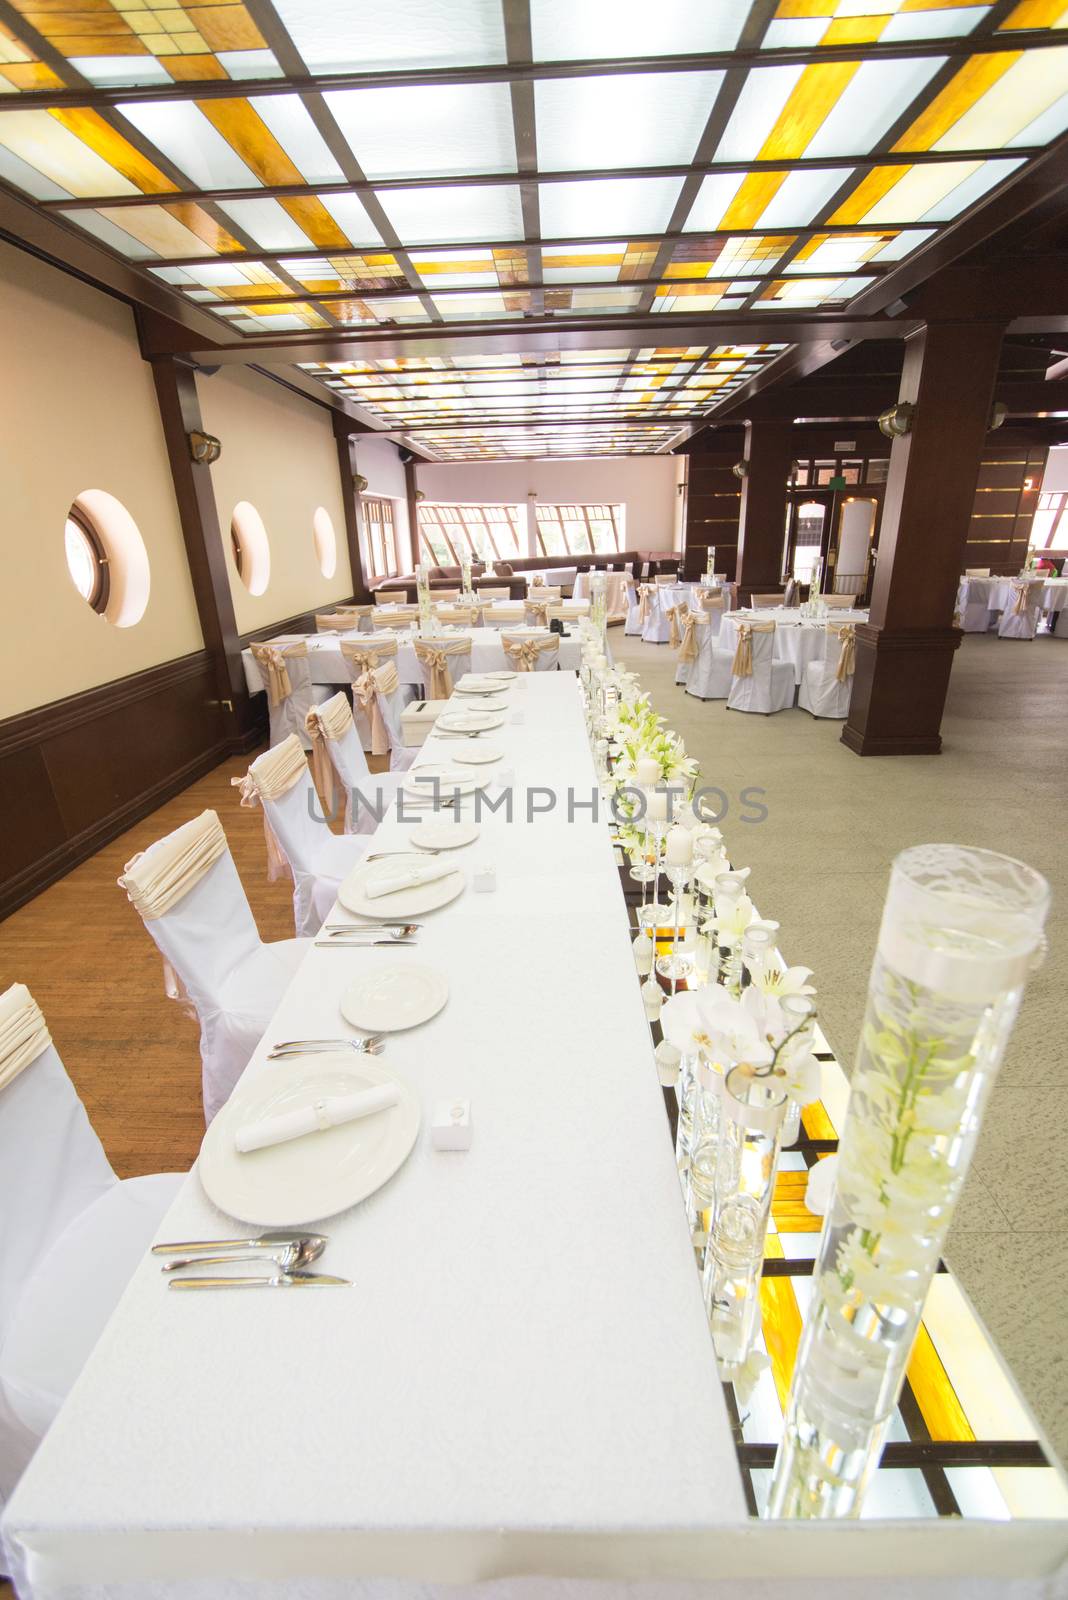 Wedding table decoration with candle, flowers and glassware